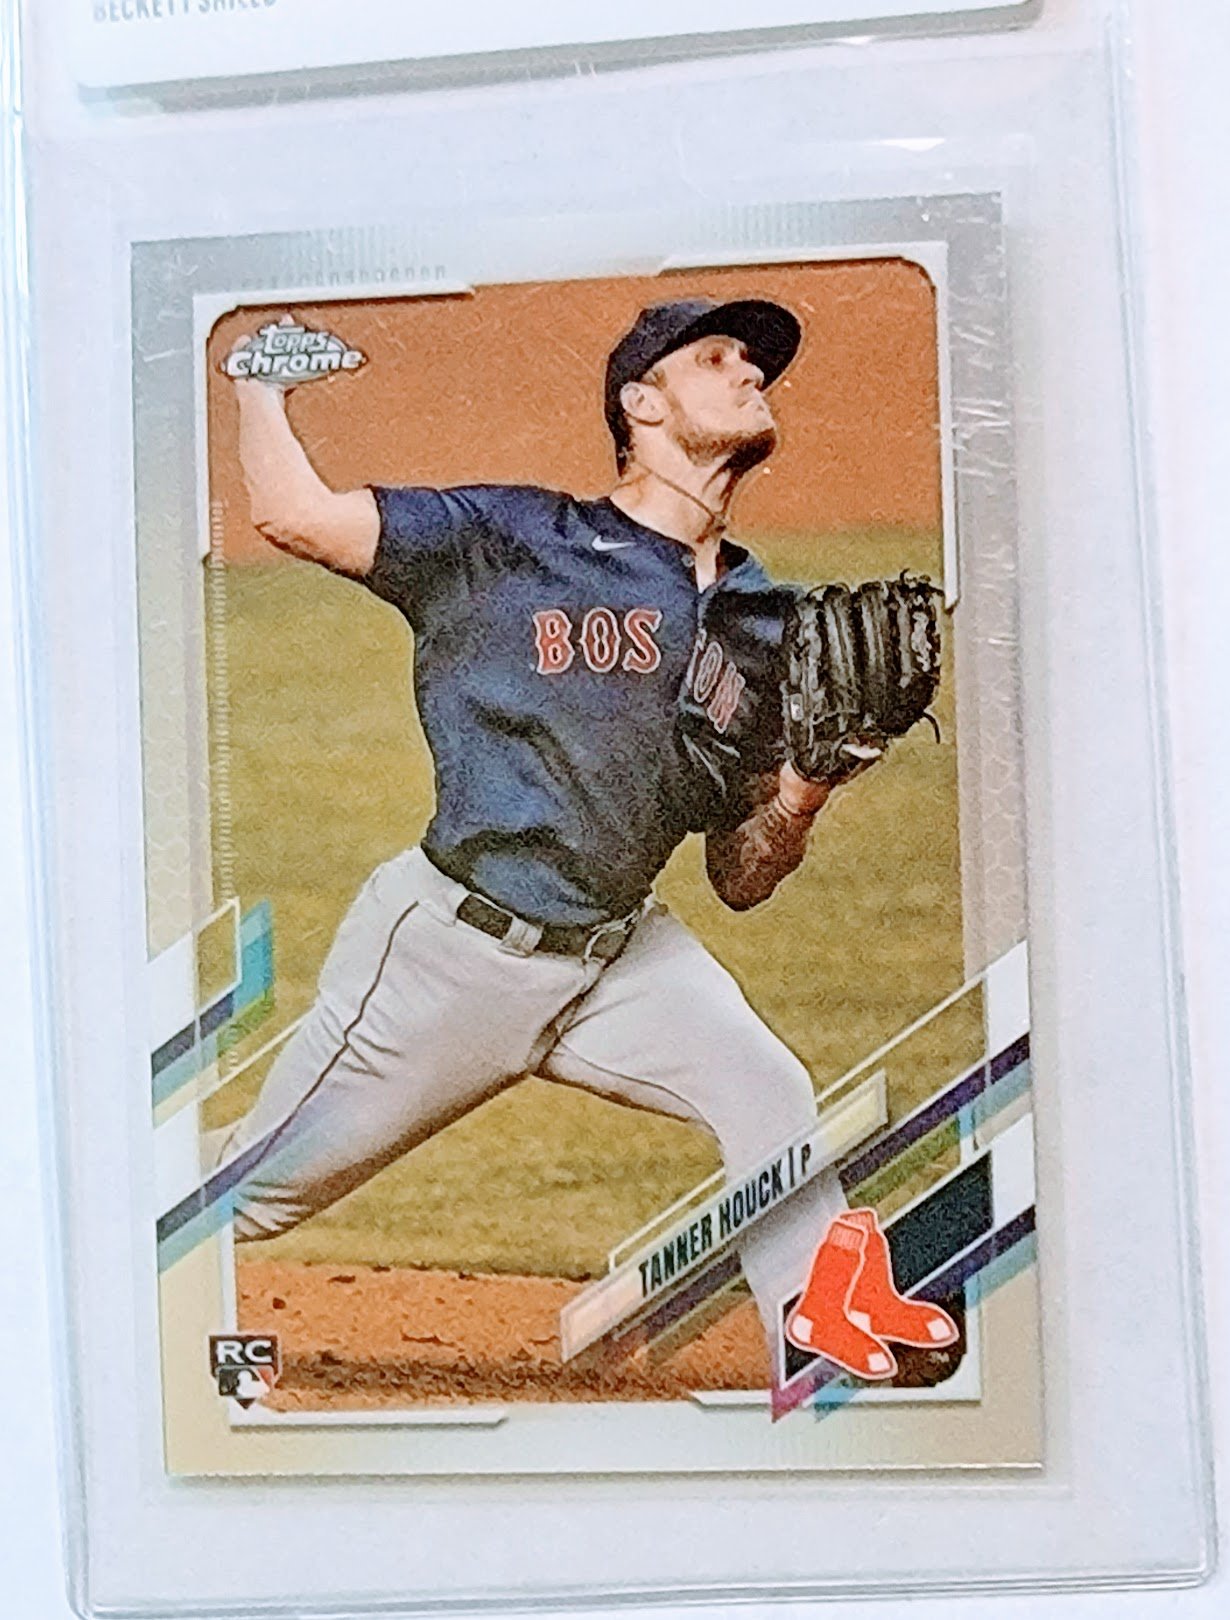 2021 Topps Chrome Tanner Houck Rookie Baseball Card TPTV simple Xclusive Collectibles   